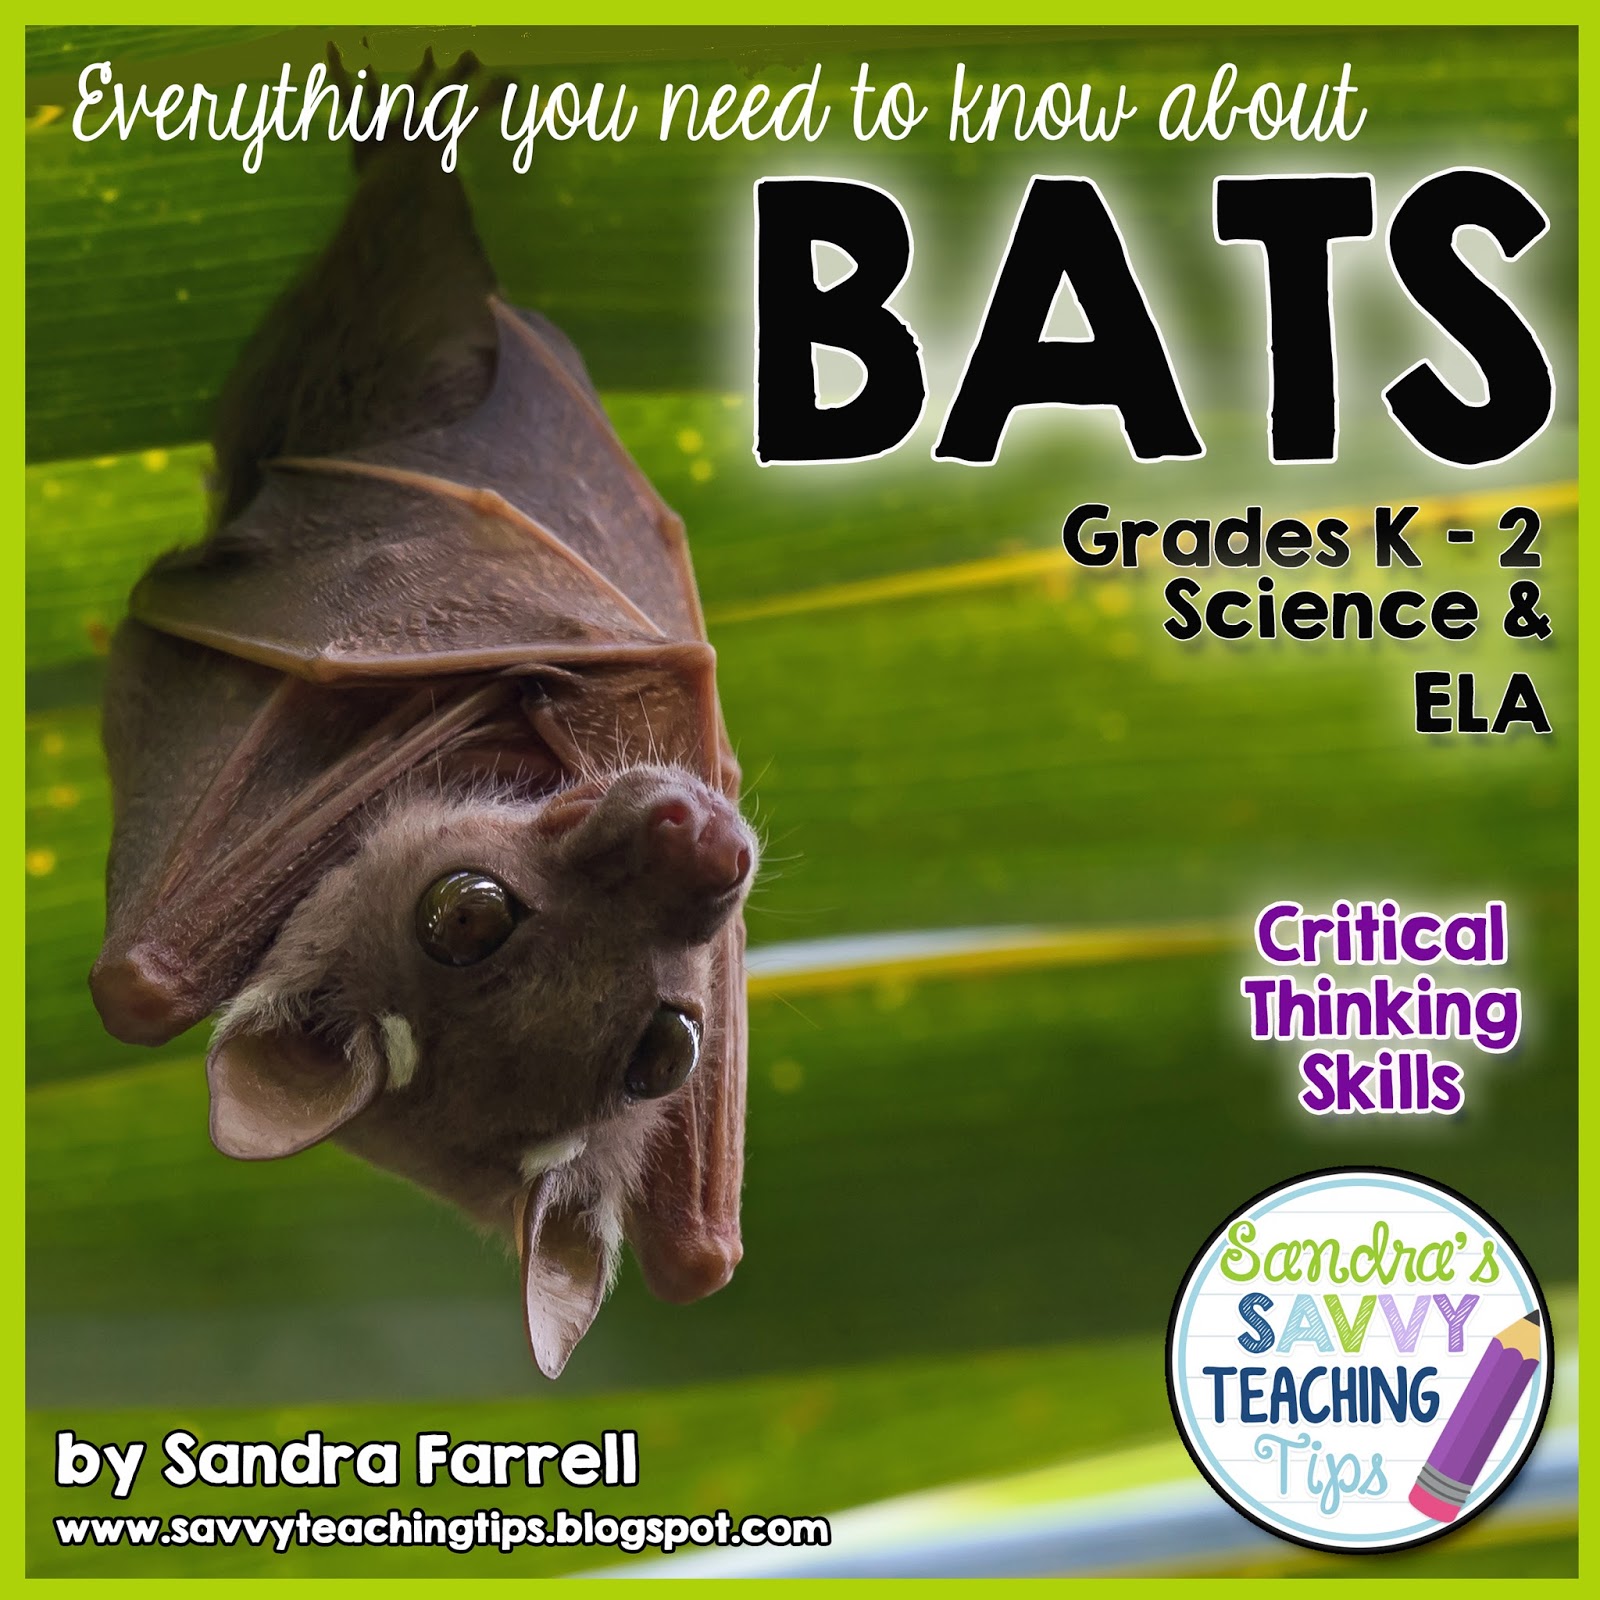 A fully complete unit about bats.  There's fantastic information about life science, life cycle, language arts, math and levelled readers too.